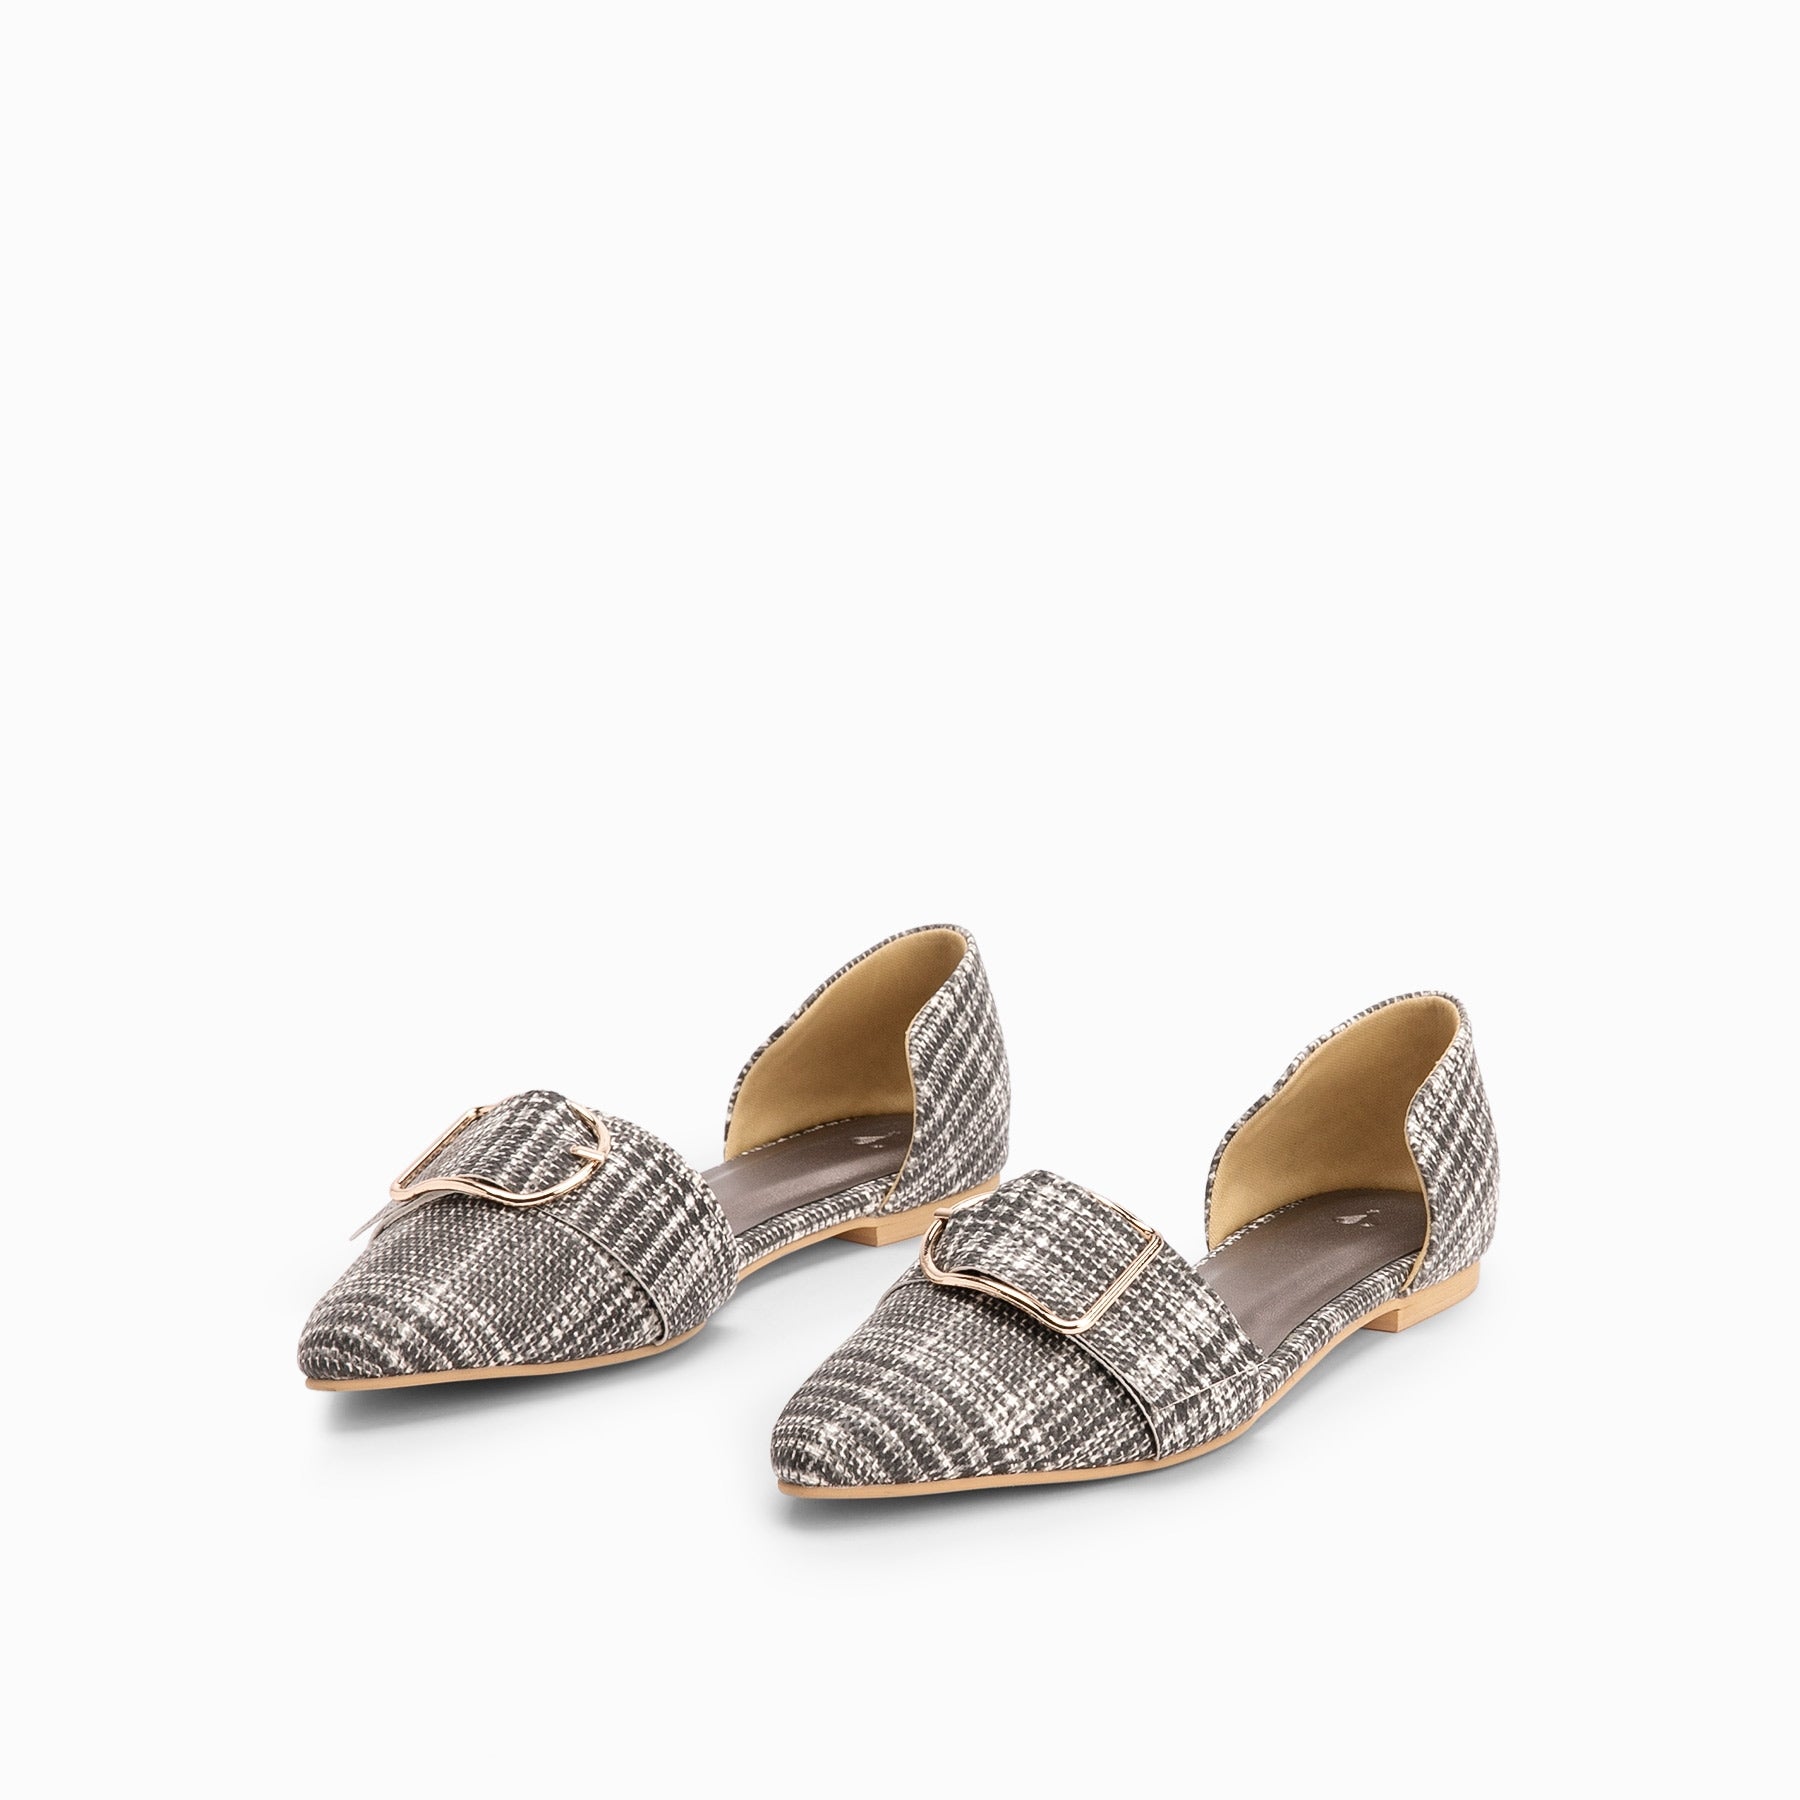 Houndstooth Pointed Buckle Flats